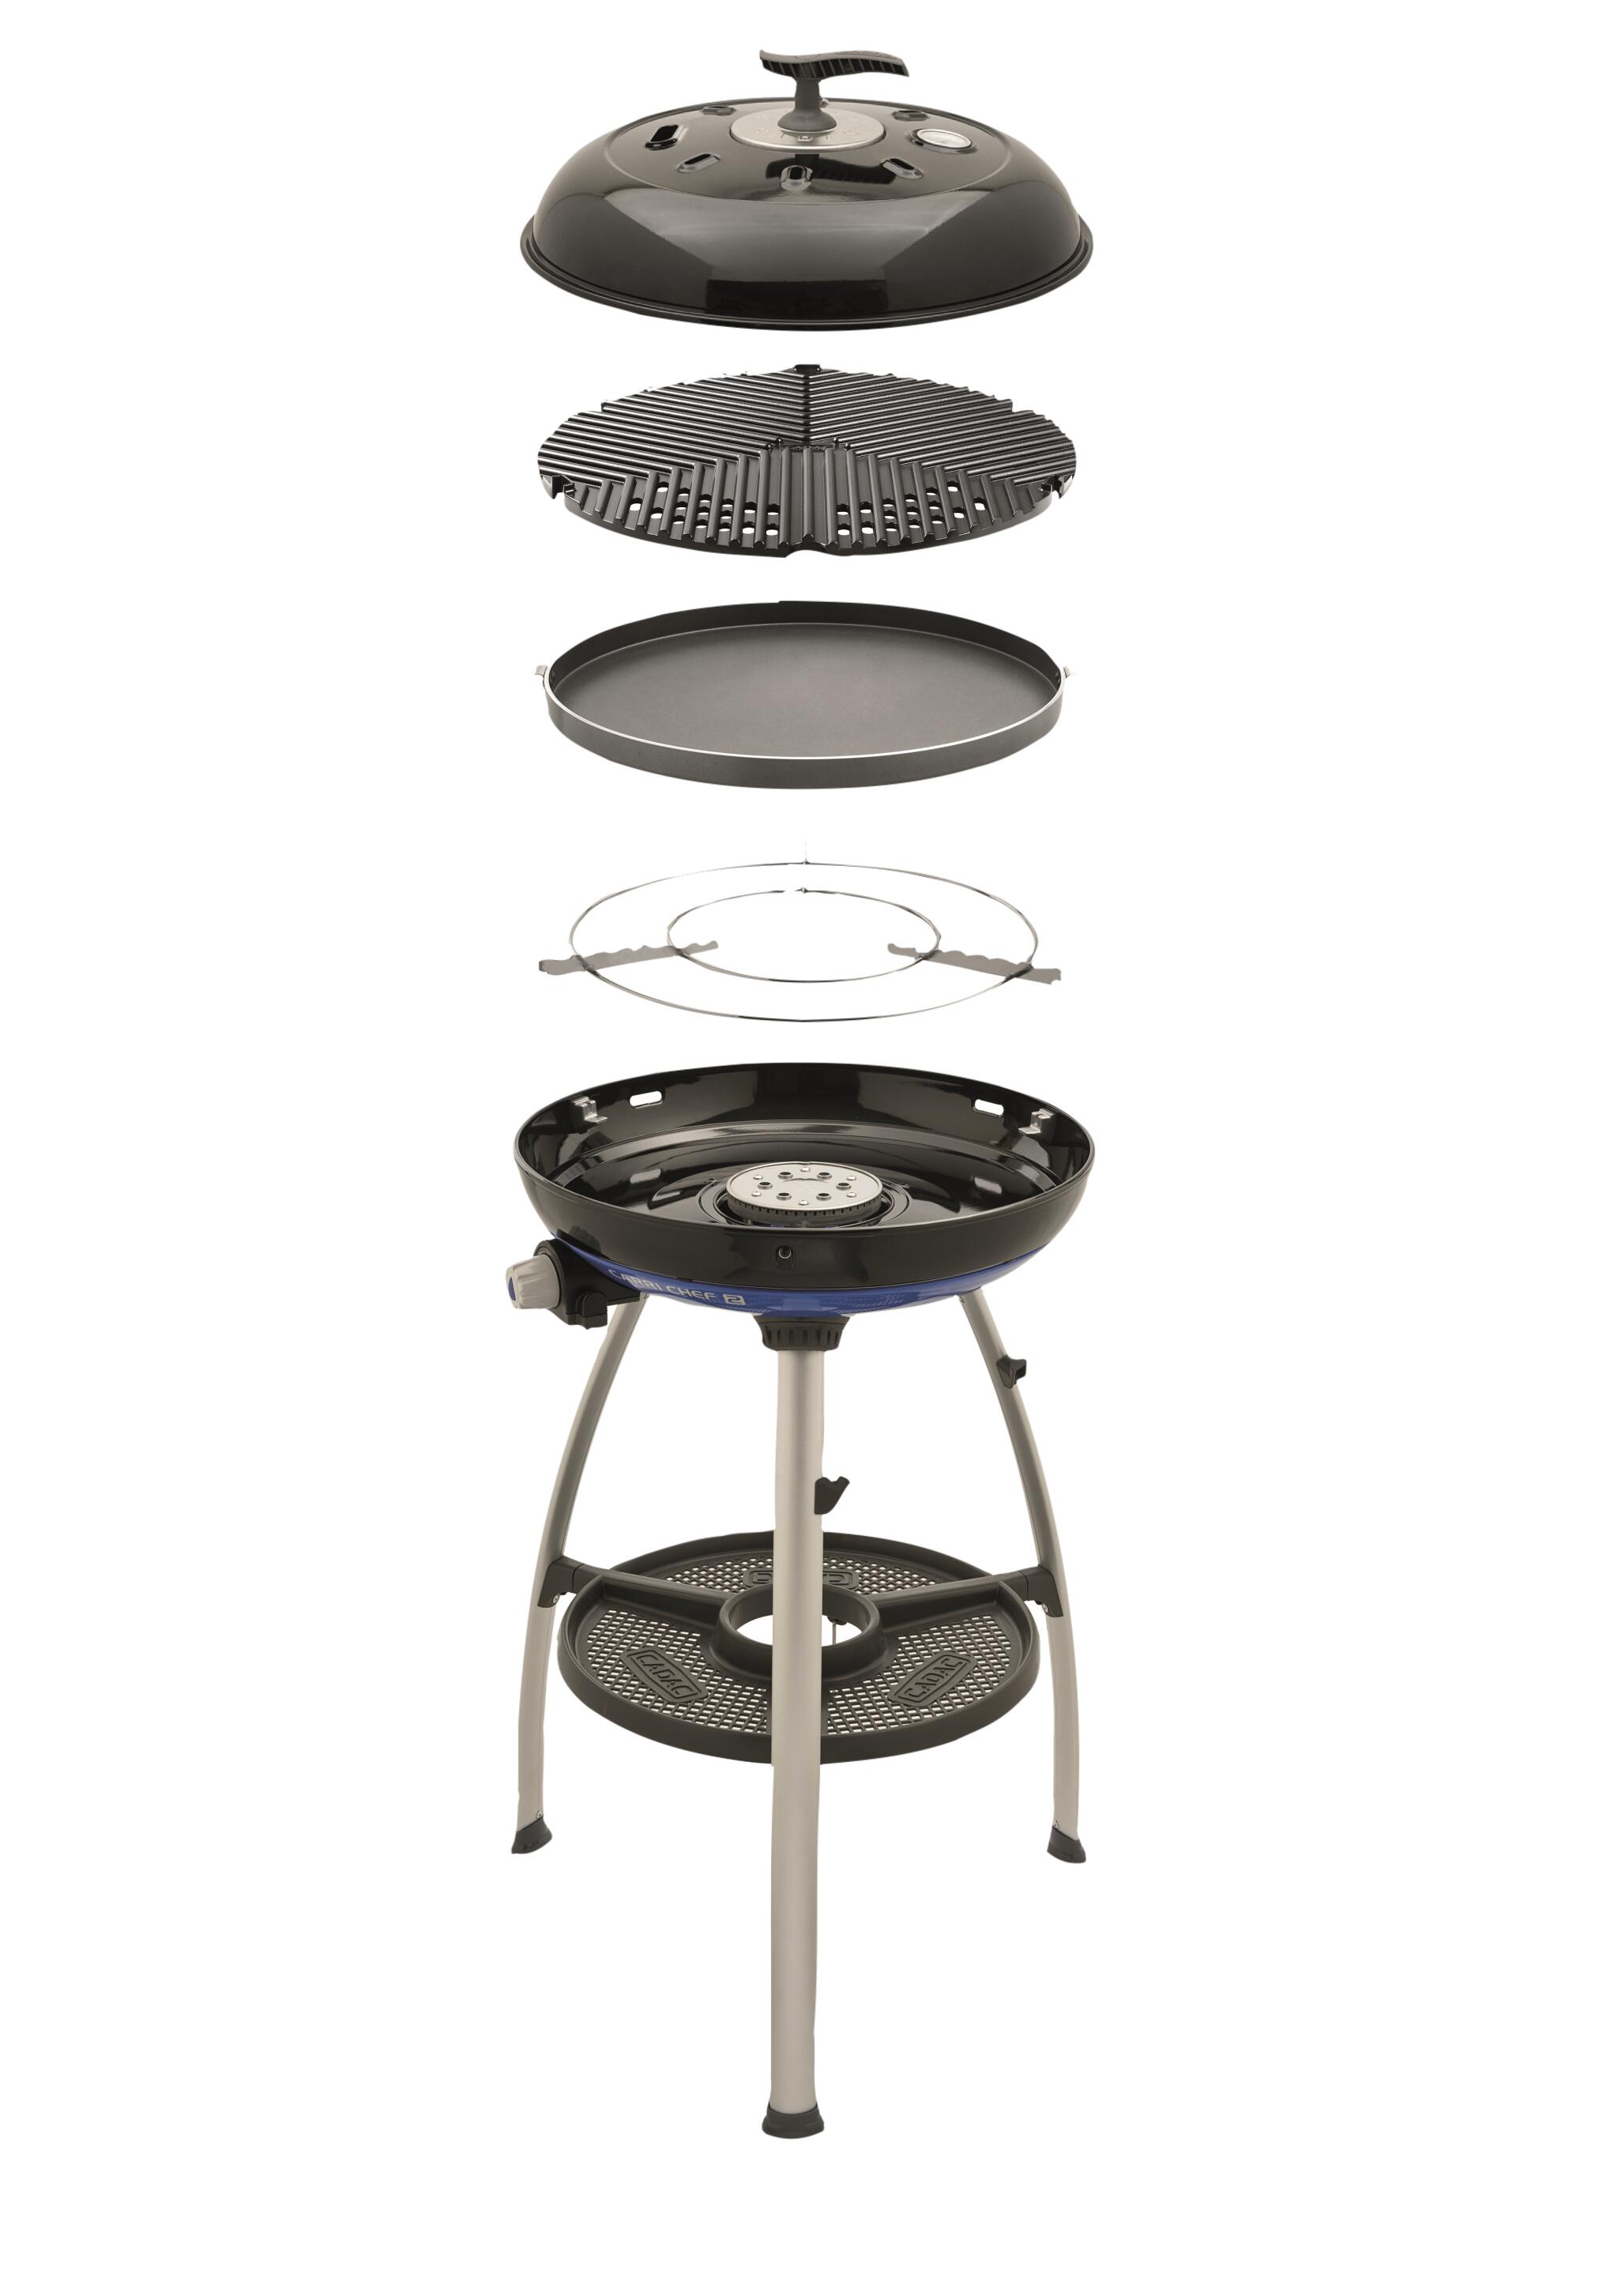 Camping Stoves - Electric & Gas Camping Cookers